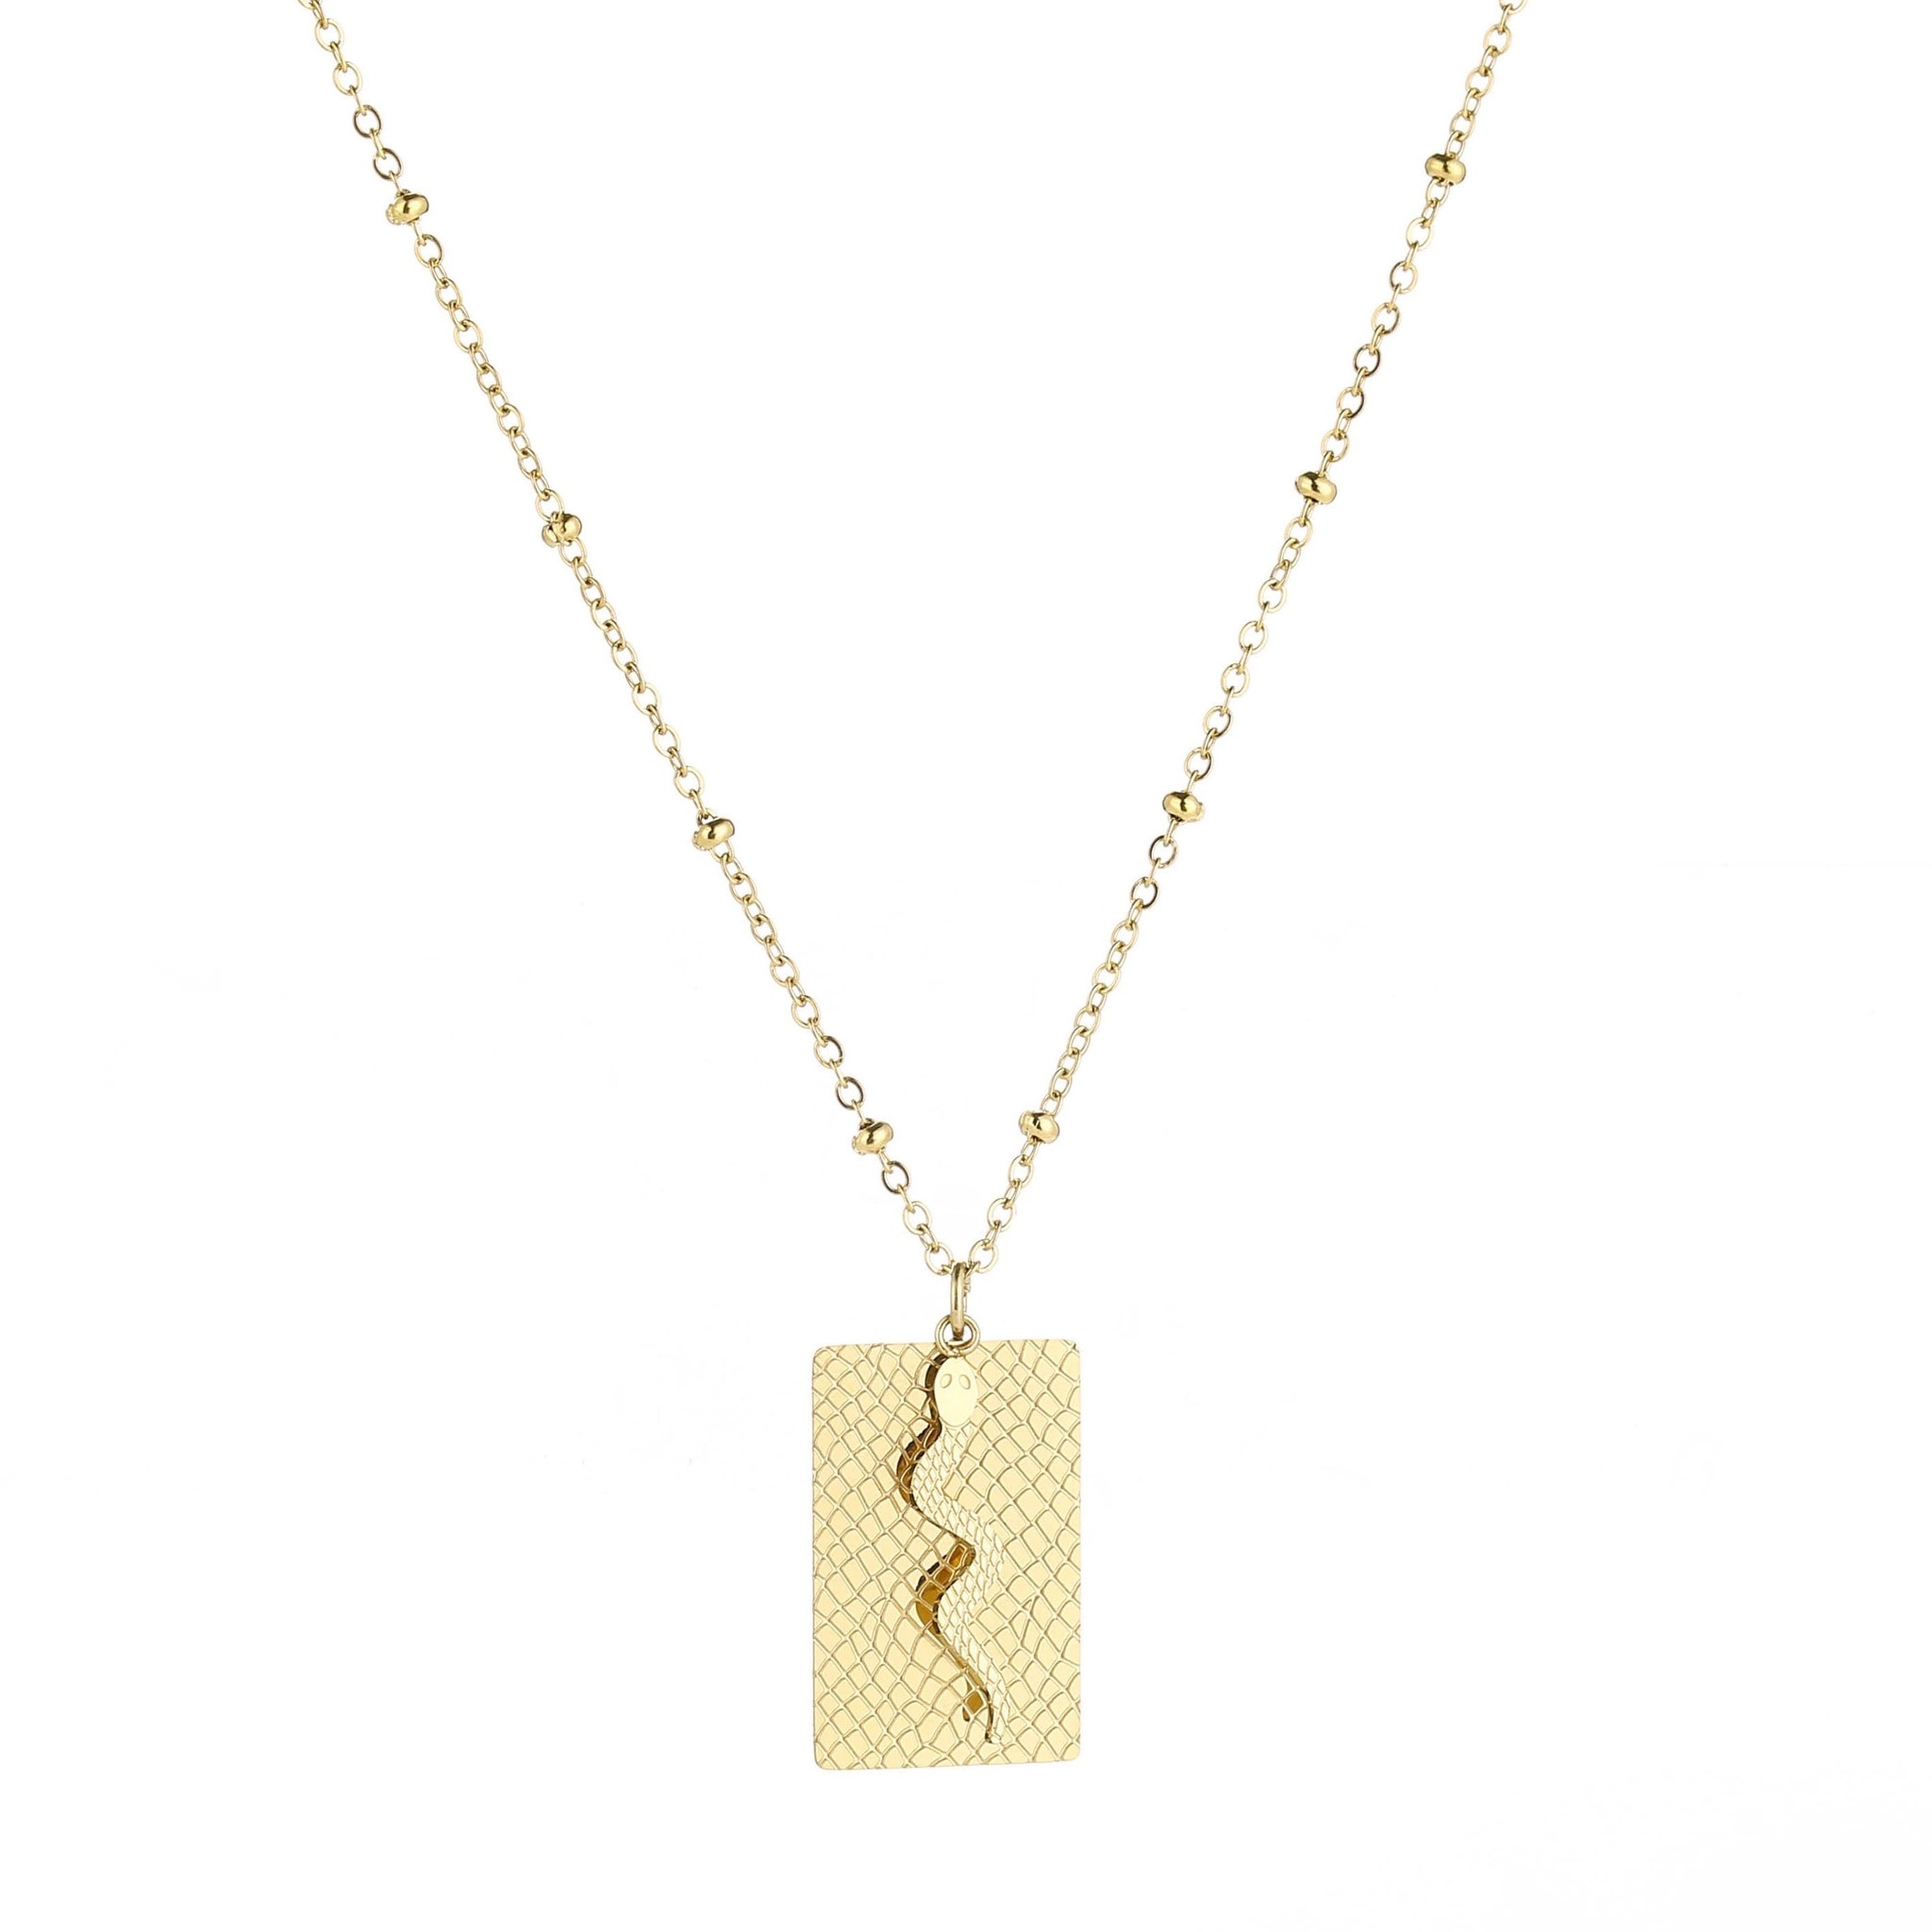 Gold Snake Tag Necklace - Hello My Love